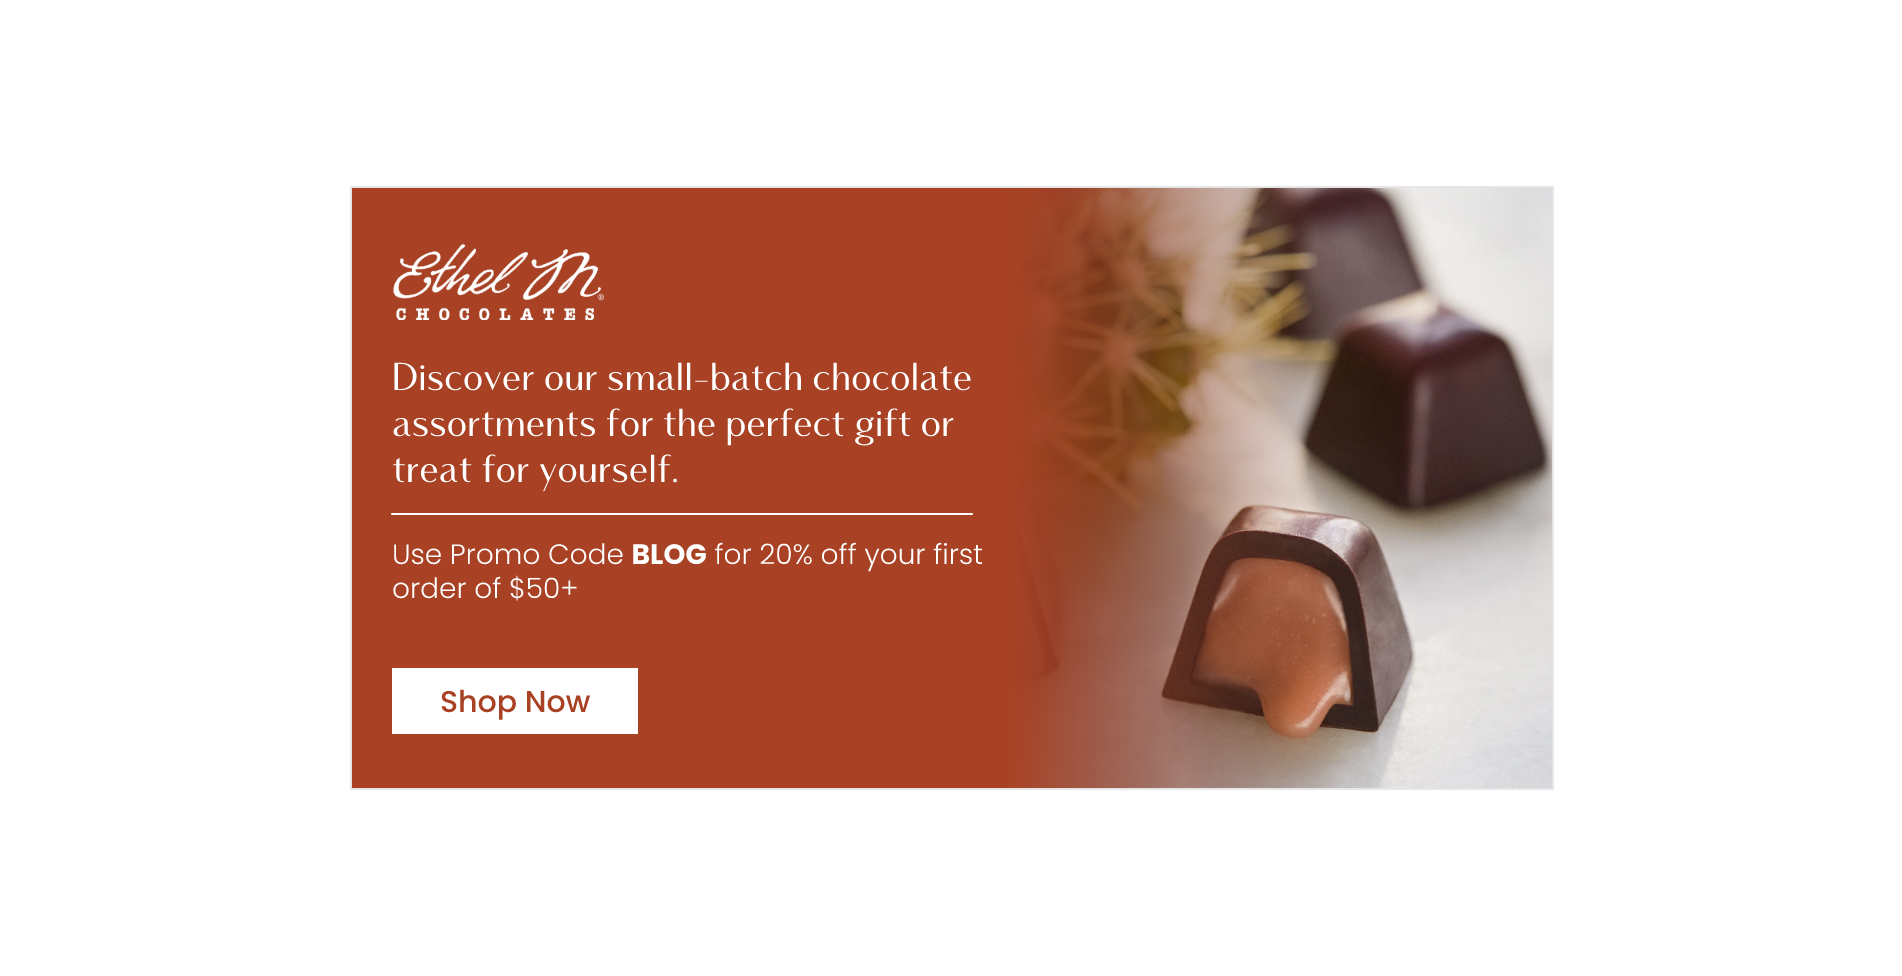 Discover our small-batch chocolate assortments for the perfect gift or treat for yourself. Shop now!